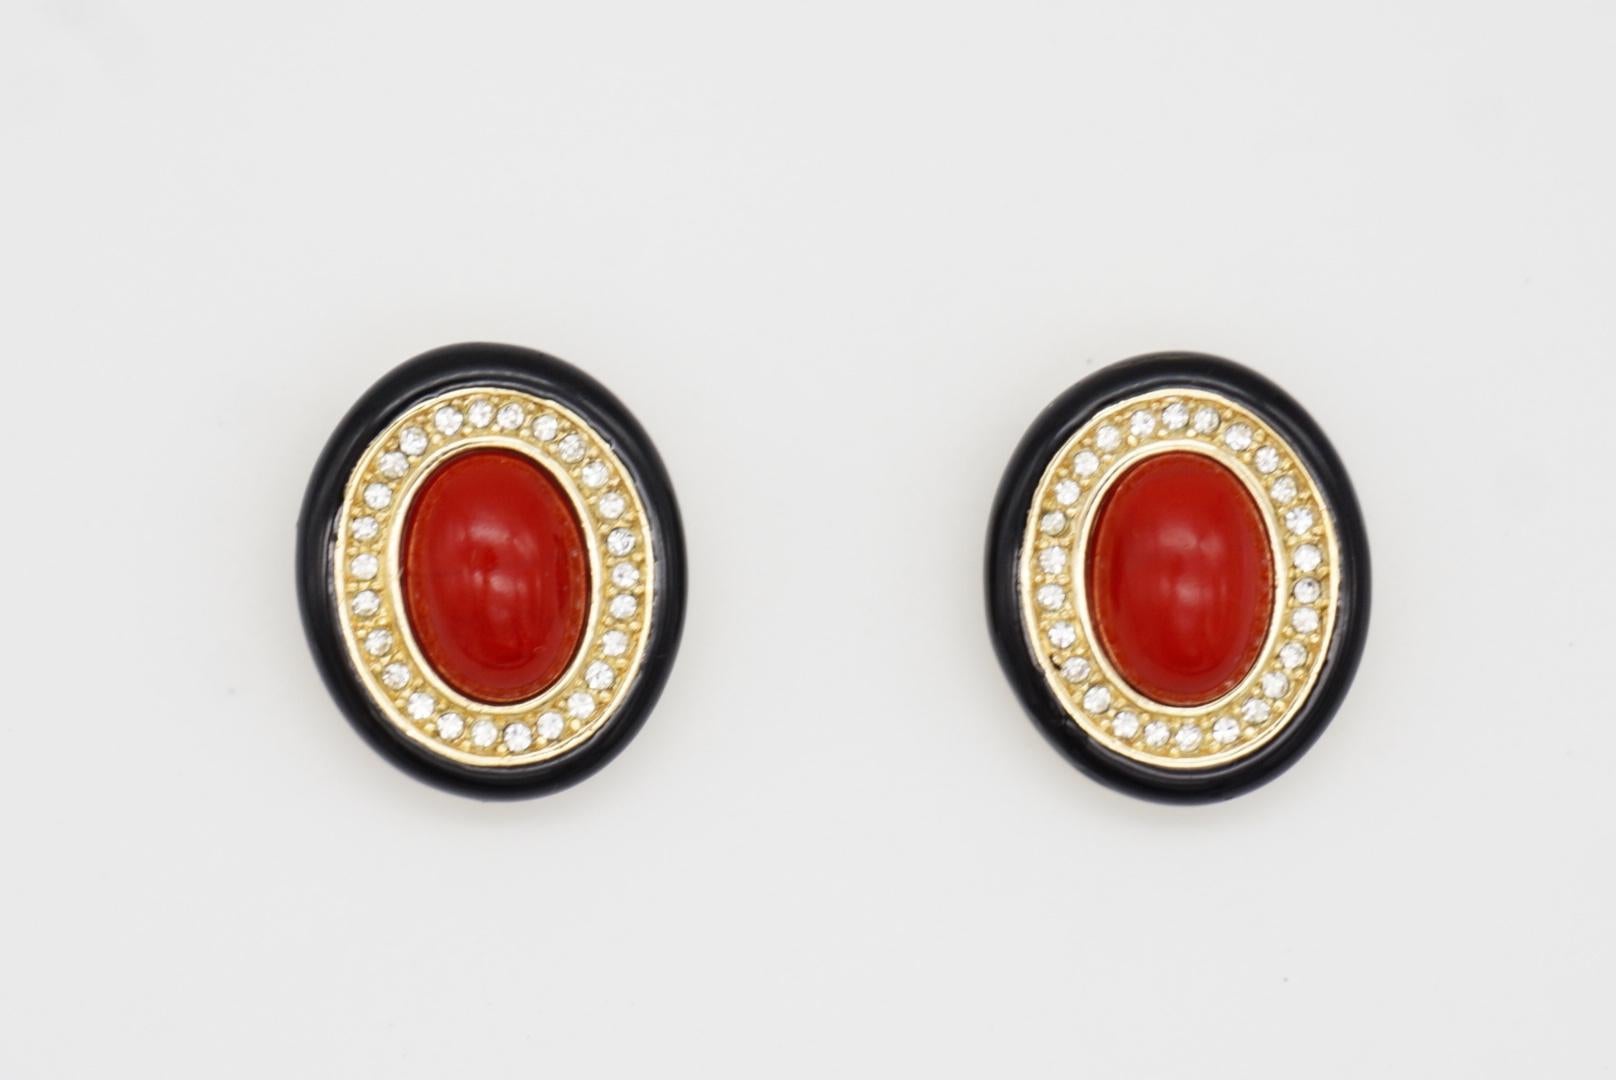 Christian Dior GROSSE 1970s Large Red Oval Pearl Crystals Black Clip Earrings For Sale 2